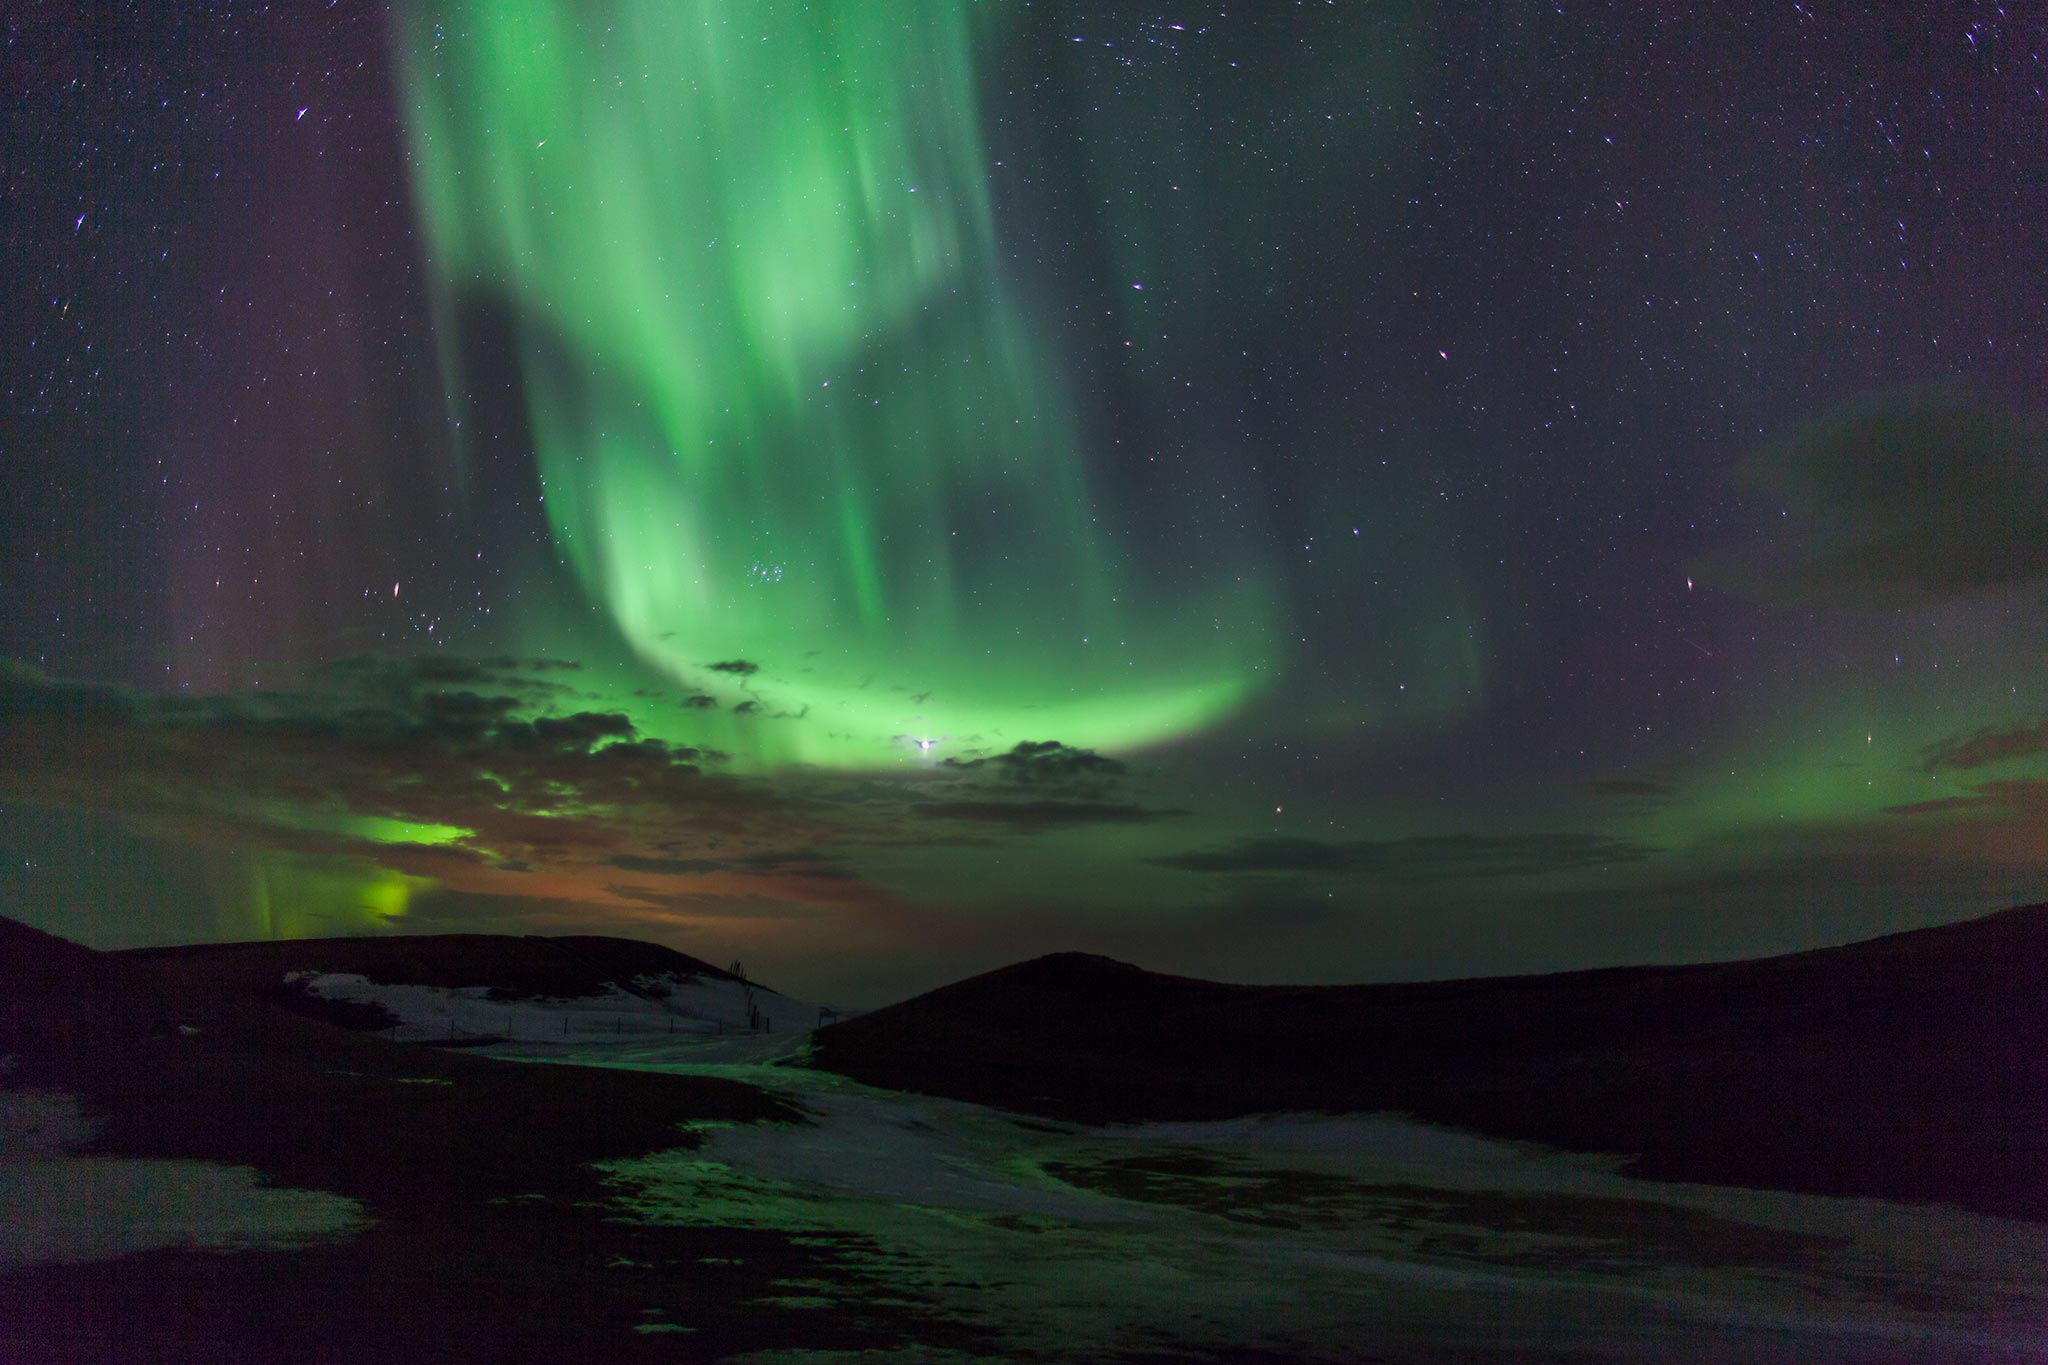 The best place to see the Northern Lights in Iceland